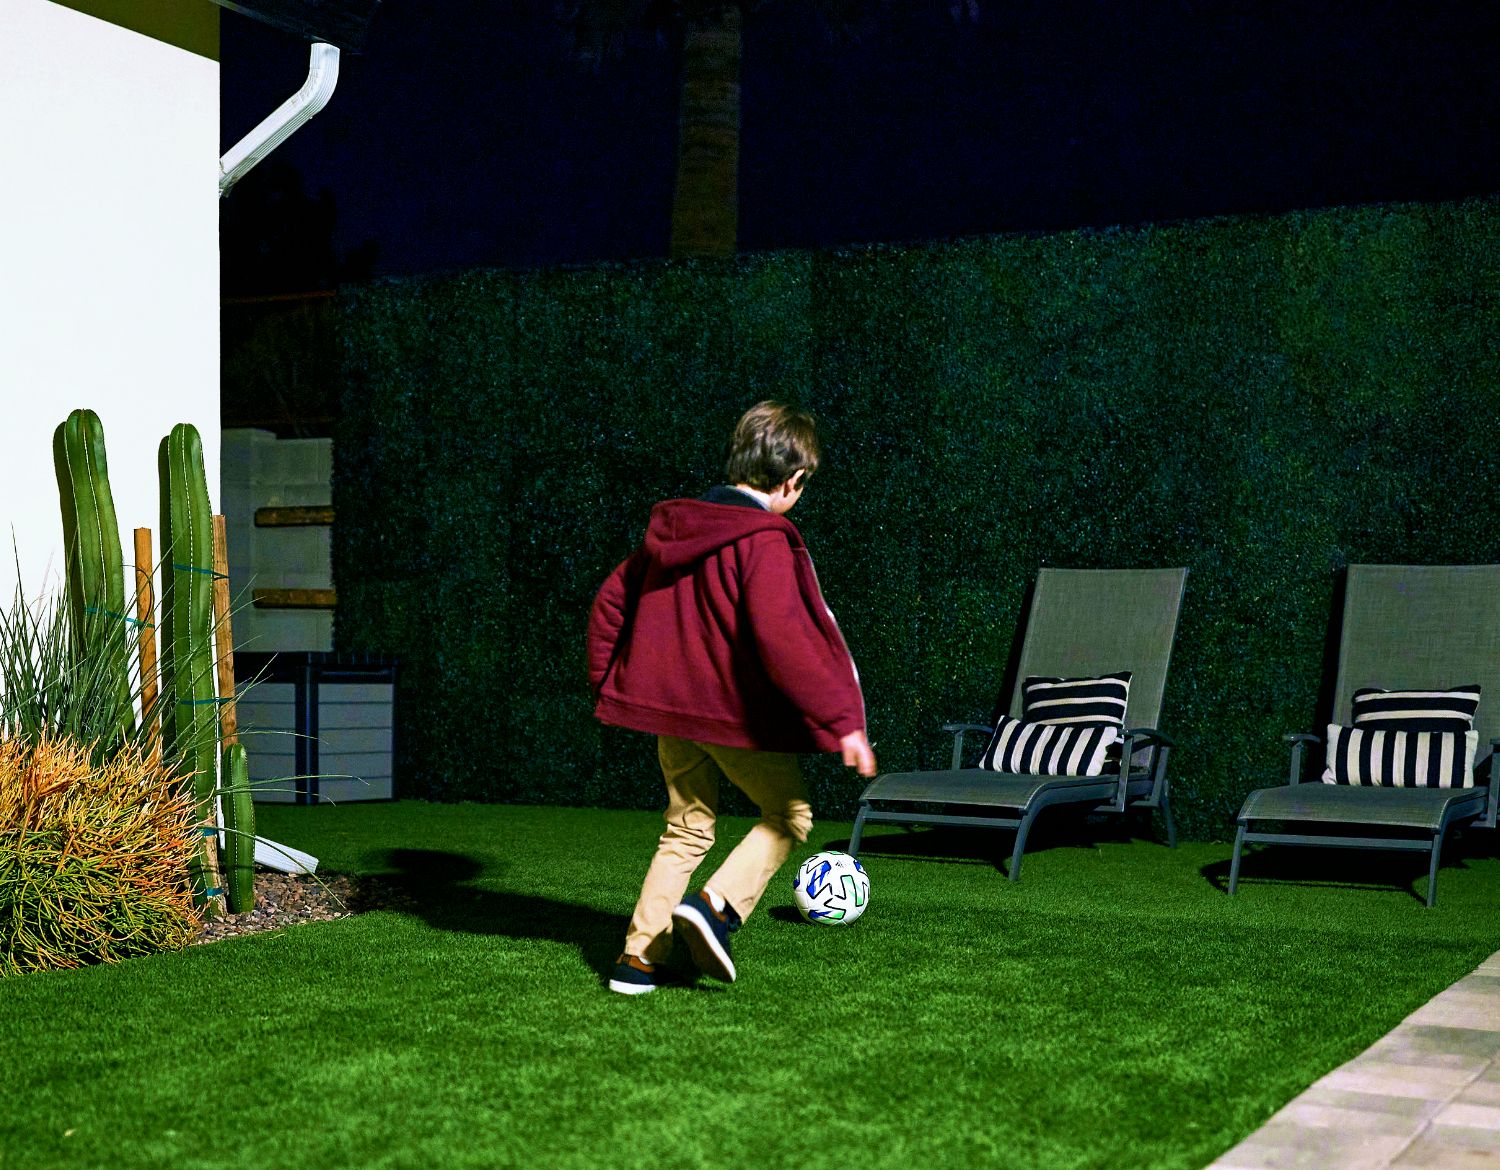 An image shows a young boy playing football in the garden at night, captured by an Arlo Ultra 2 security camera